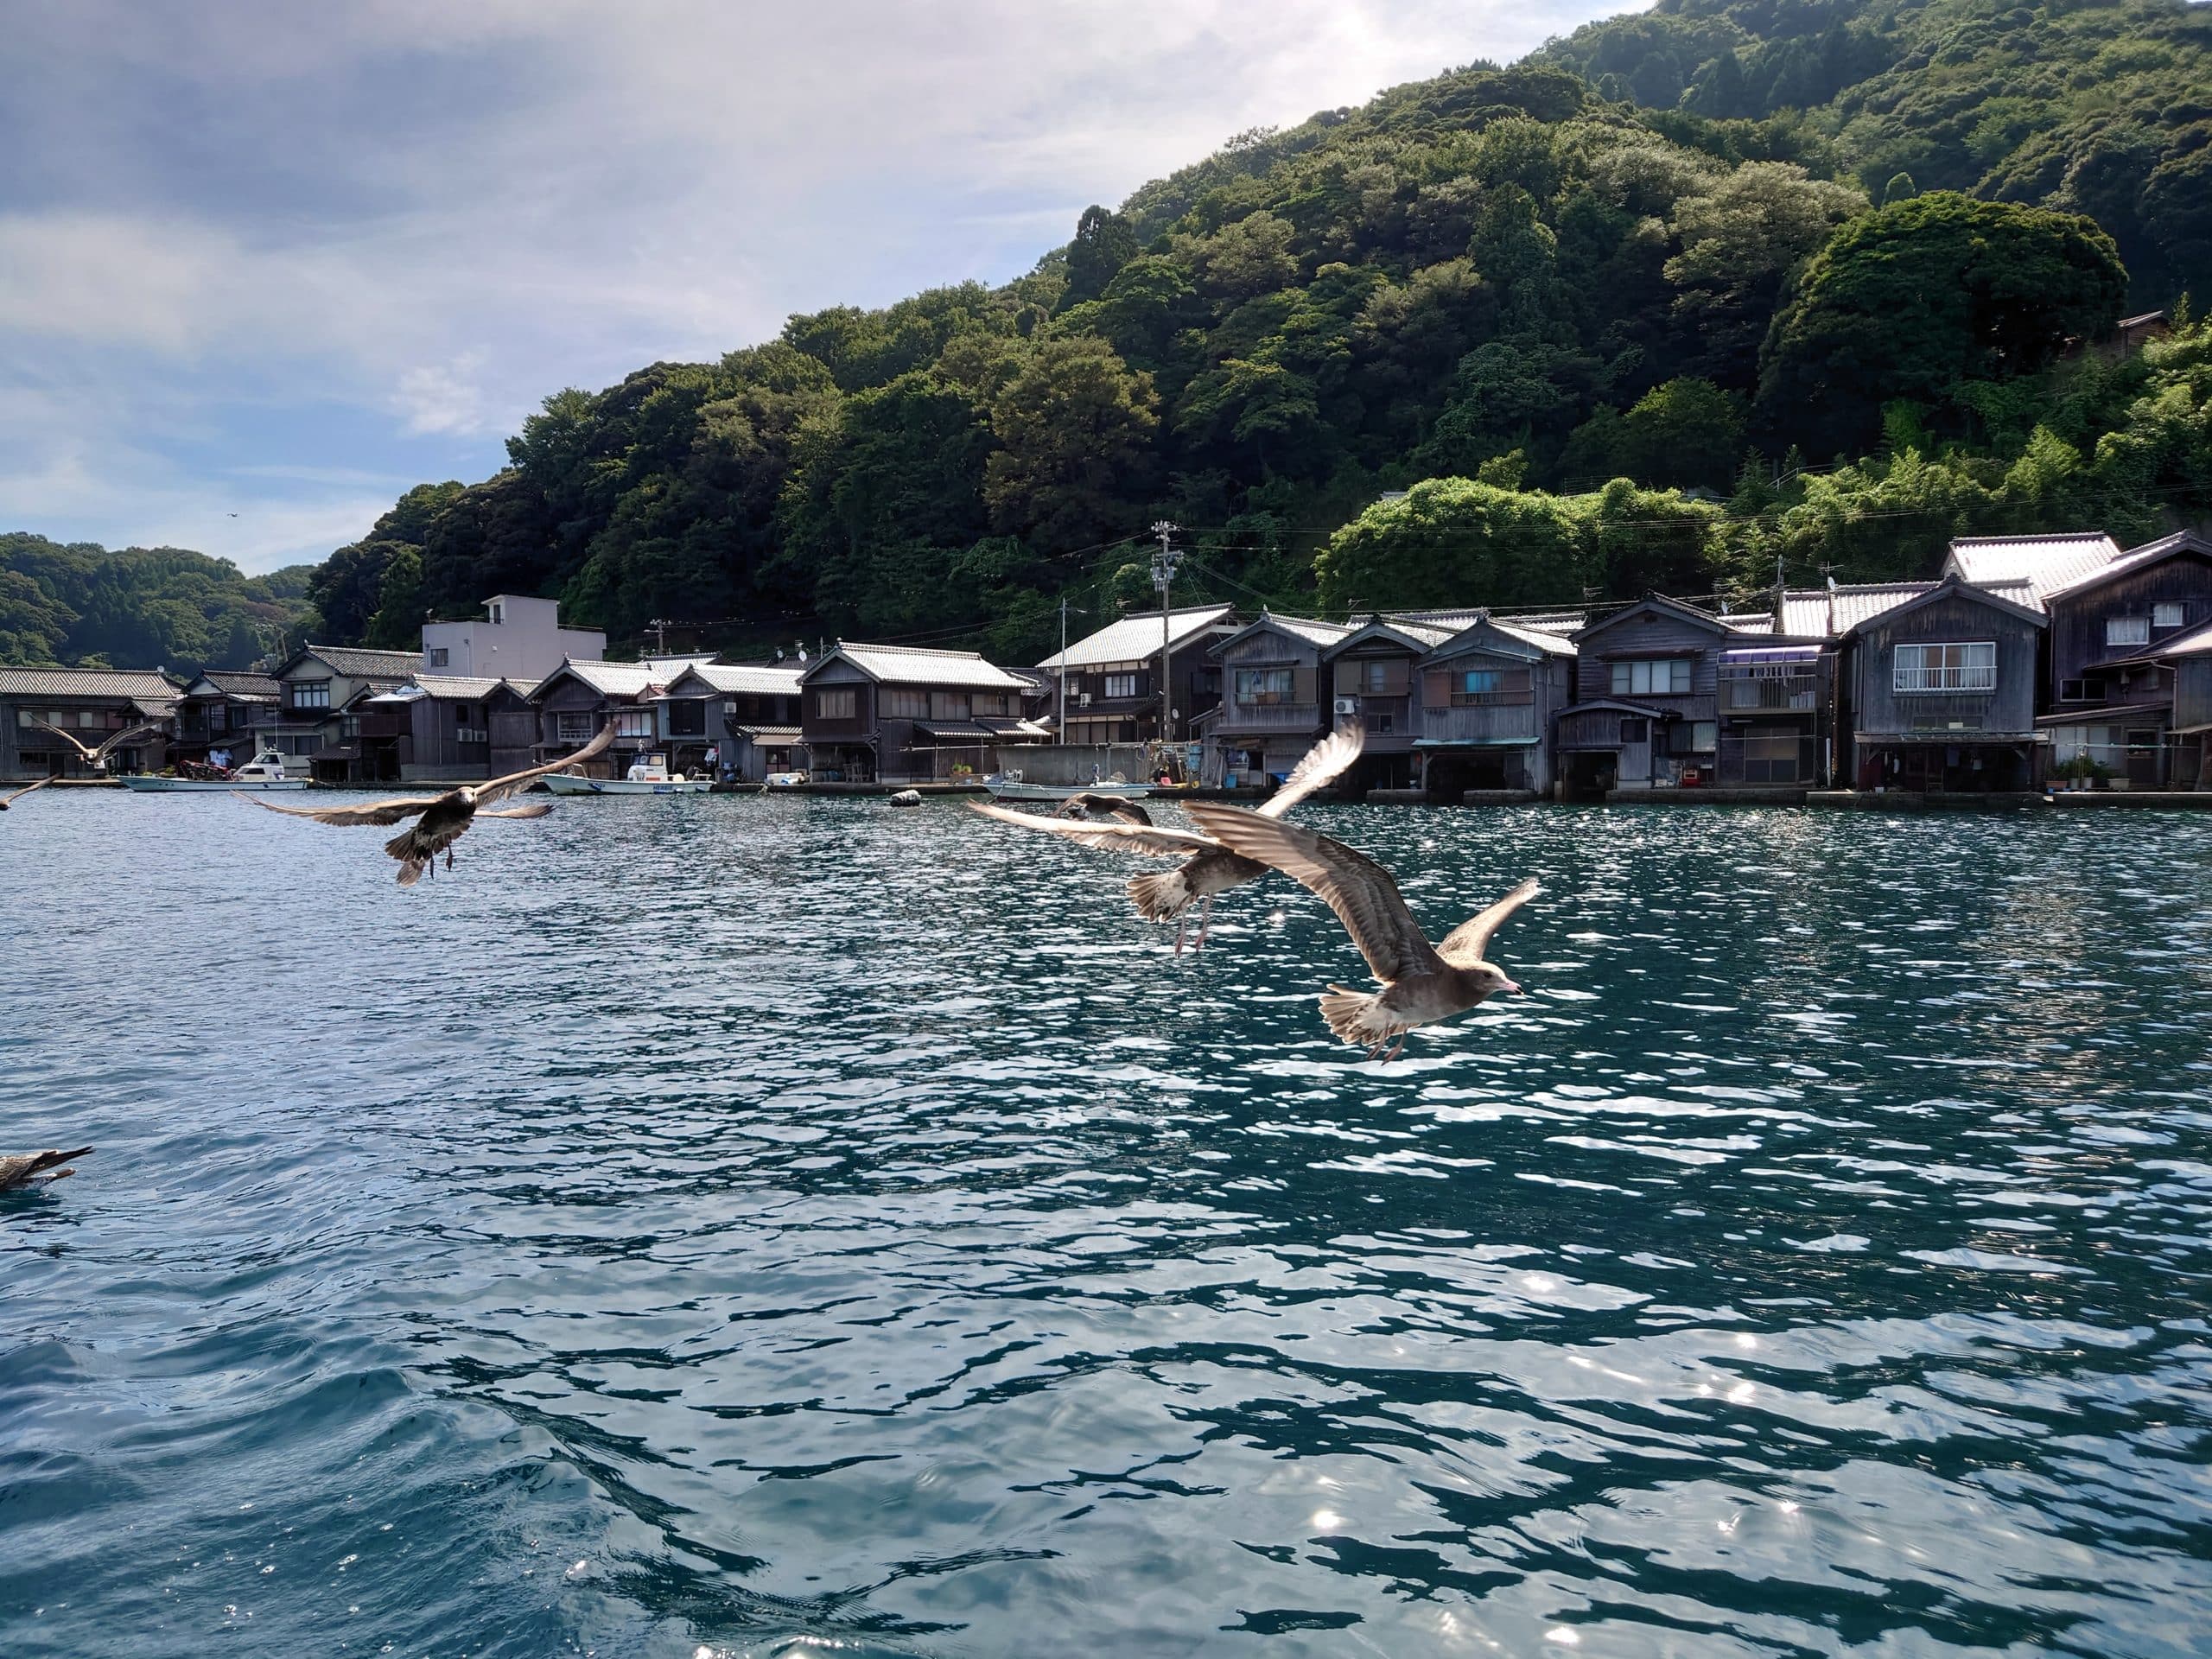 Sea gulls fly over fishing village Ine in Japan